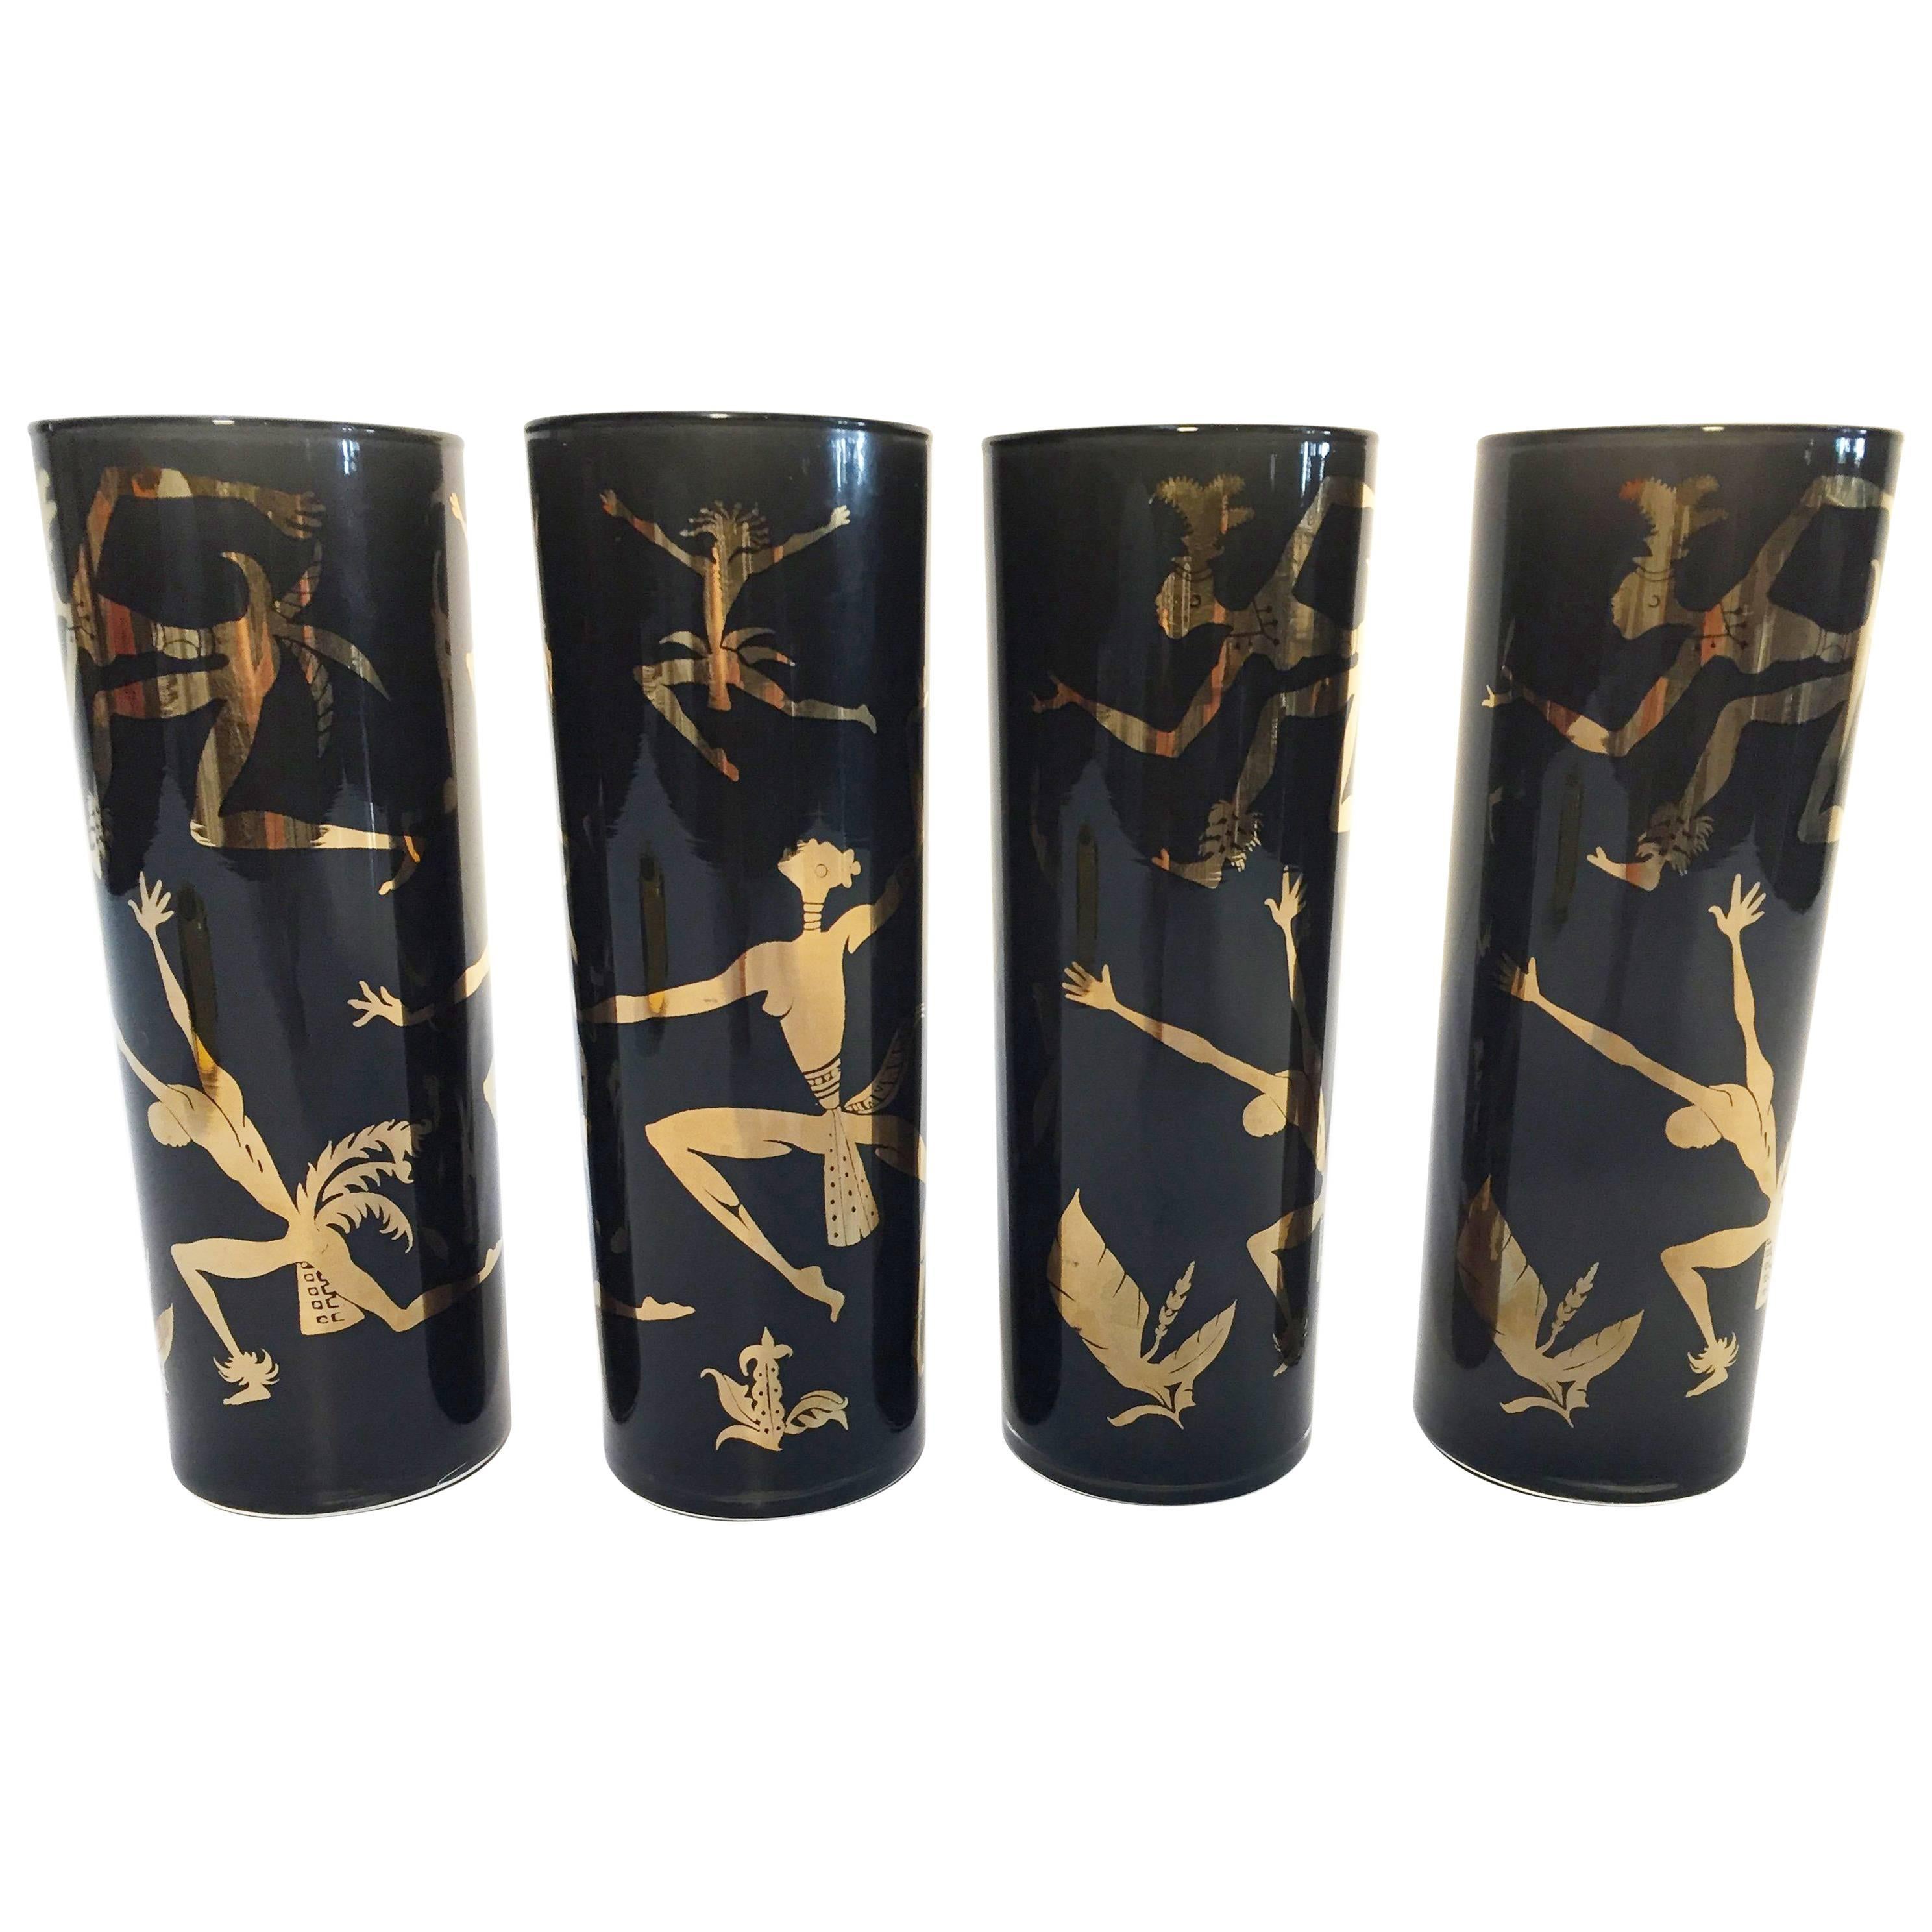 Collectible Josephine Baker Exotic African Dancers Gold and Black Barware 1950s